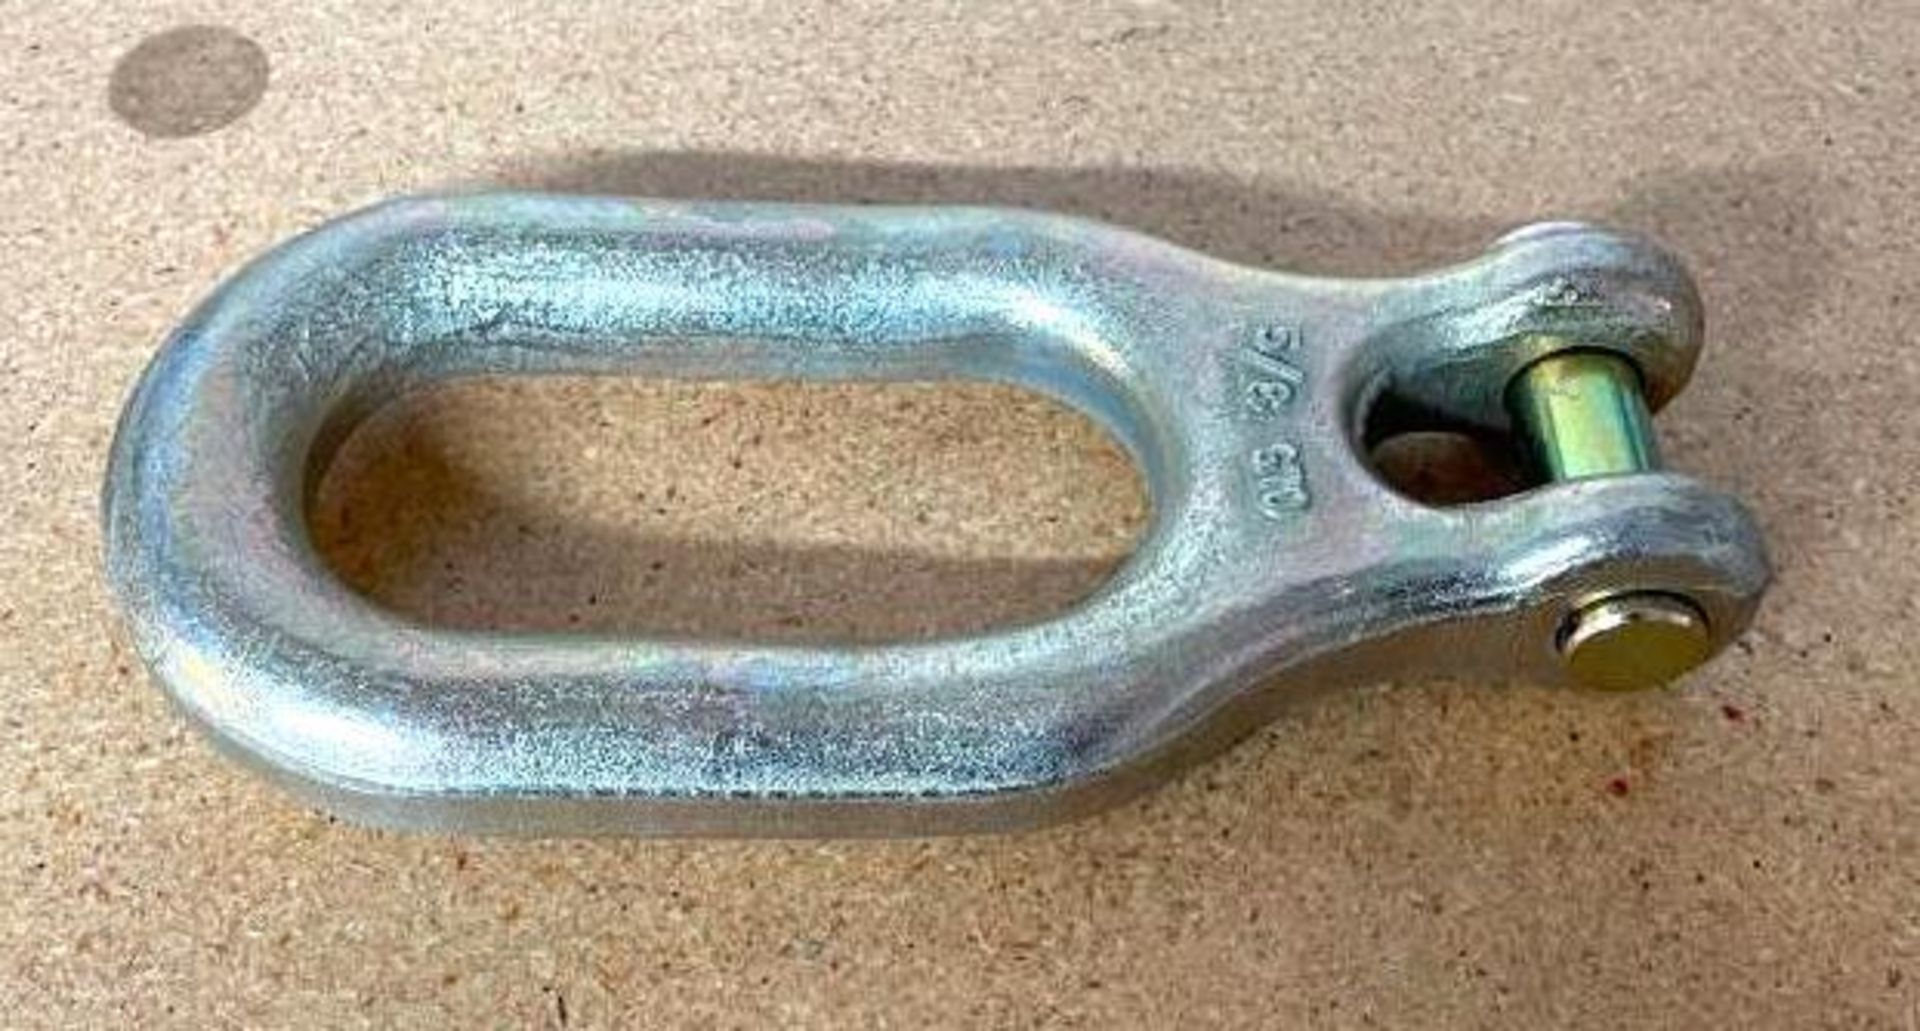 DESCRIPTION: (50) 5/8" G70 OVAL CLEVIS LOAD PIN CR PC BRAND/MODEL: LACLEDE CHAIN CO SIZE: 5/8"